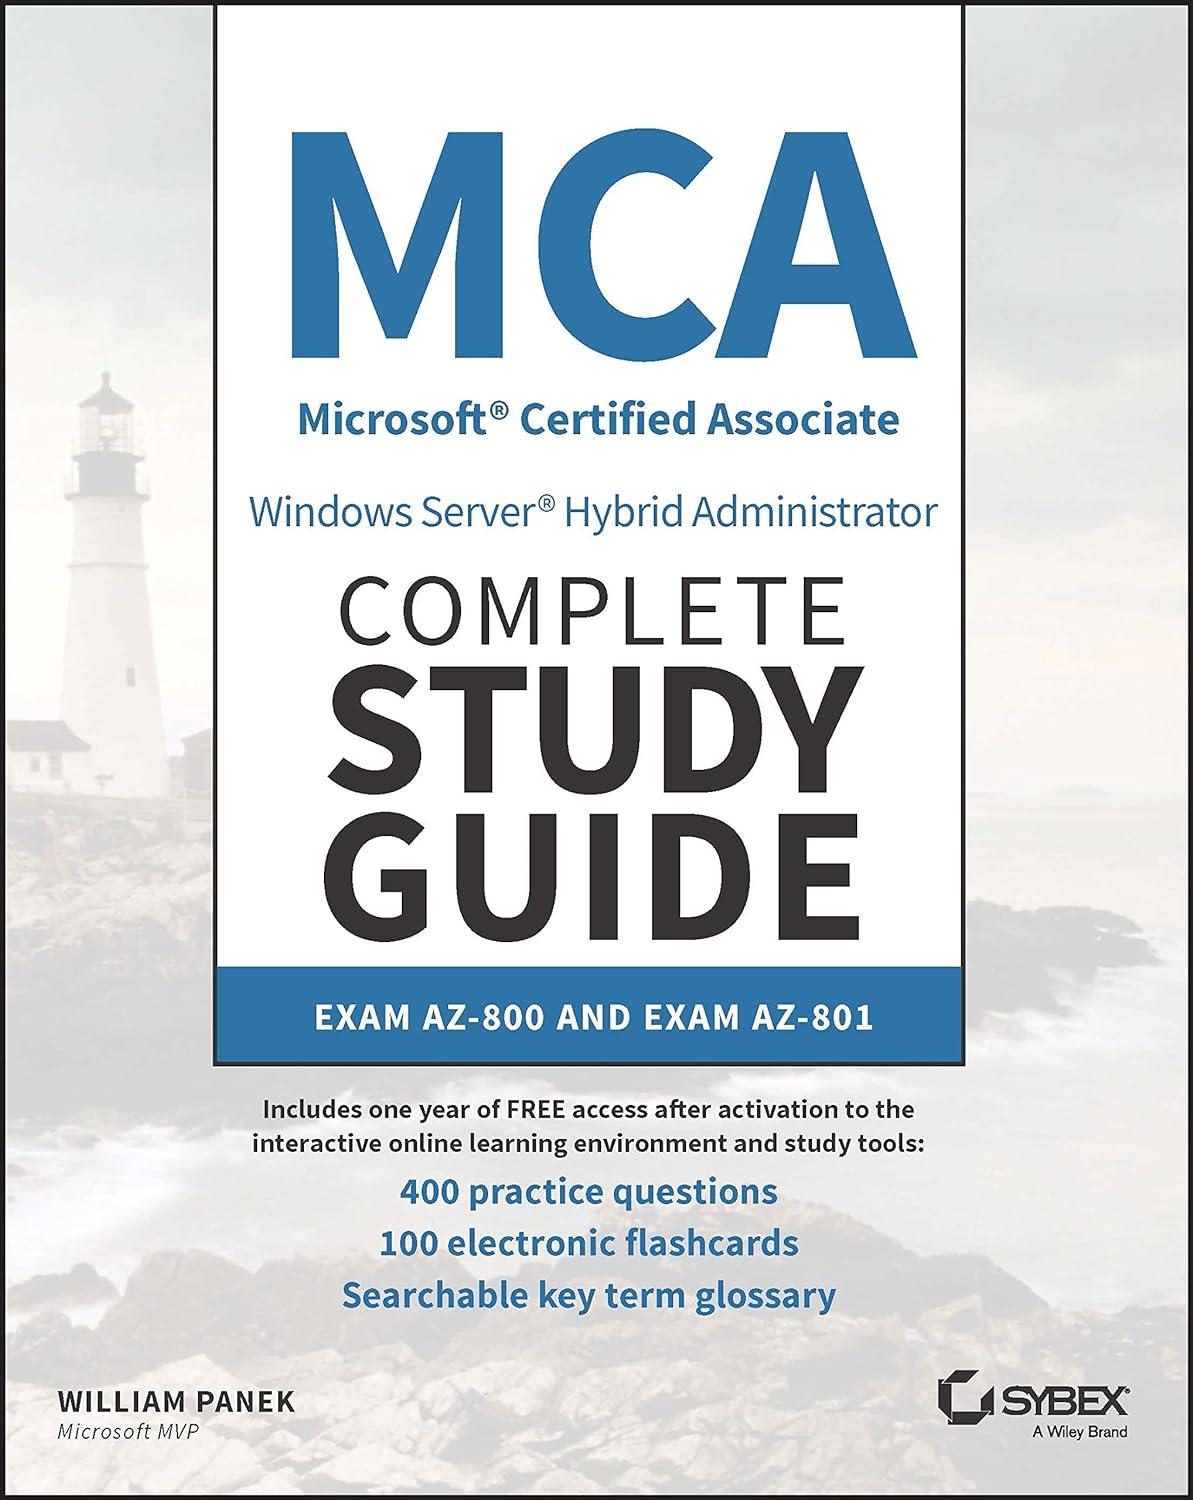 mca windows server hybrid administrator complete study guide with 400 practice test questions exam az 800 and